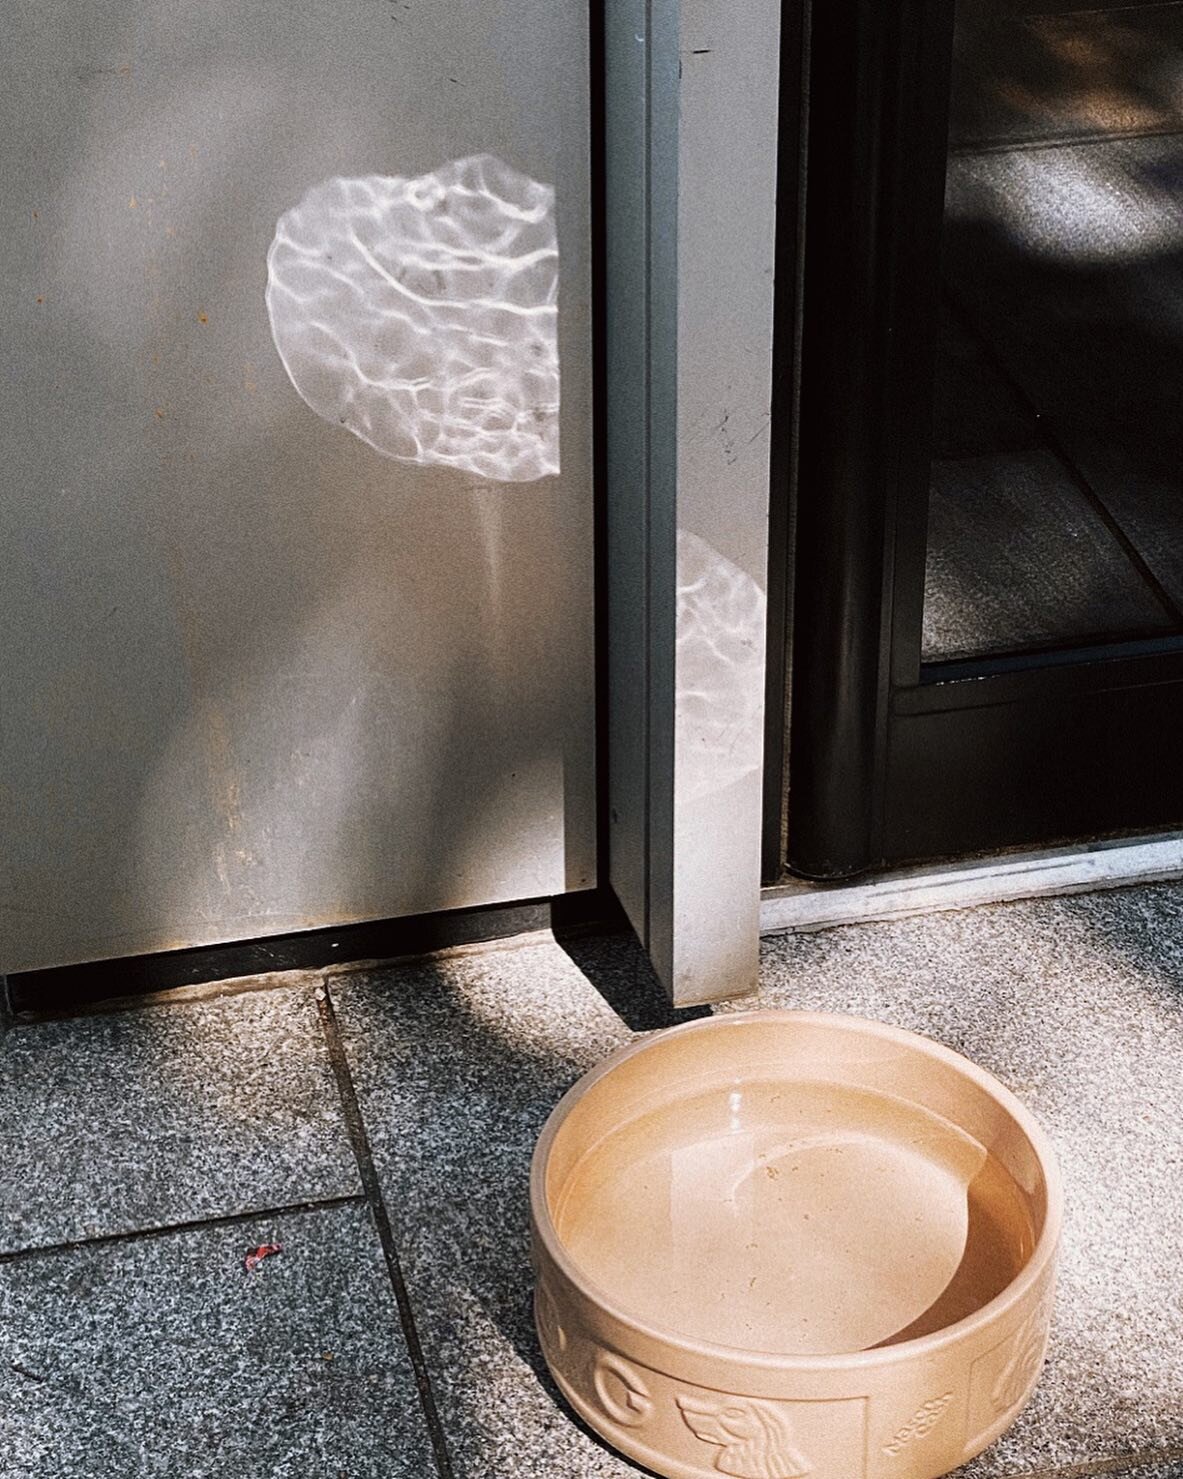 This reflection from the pet bowl reminds me of Tadao Ando, a Japanese architect, who is in famous with his minimalist building style. Instead of using patters and colours, he uses concrete blocks and water to emerge light, shadow and the surrounding